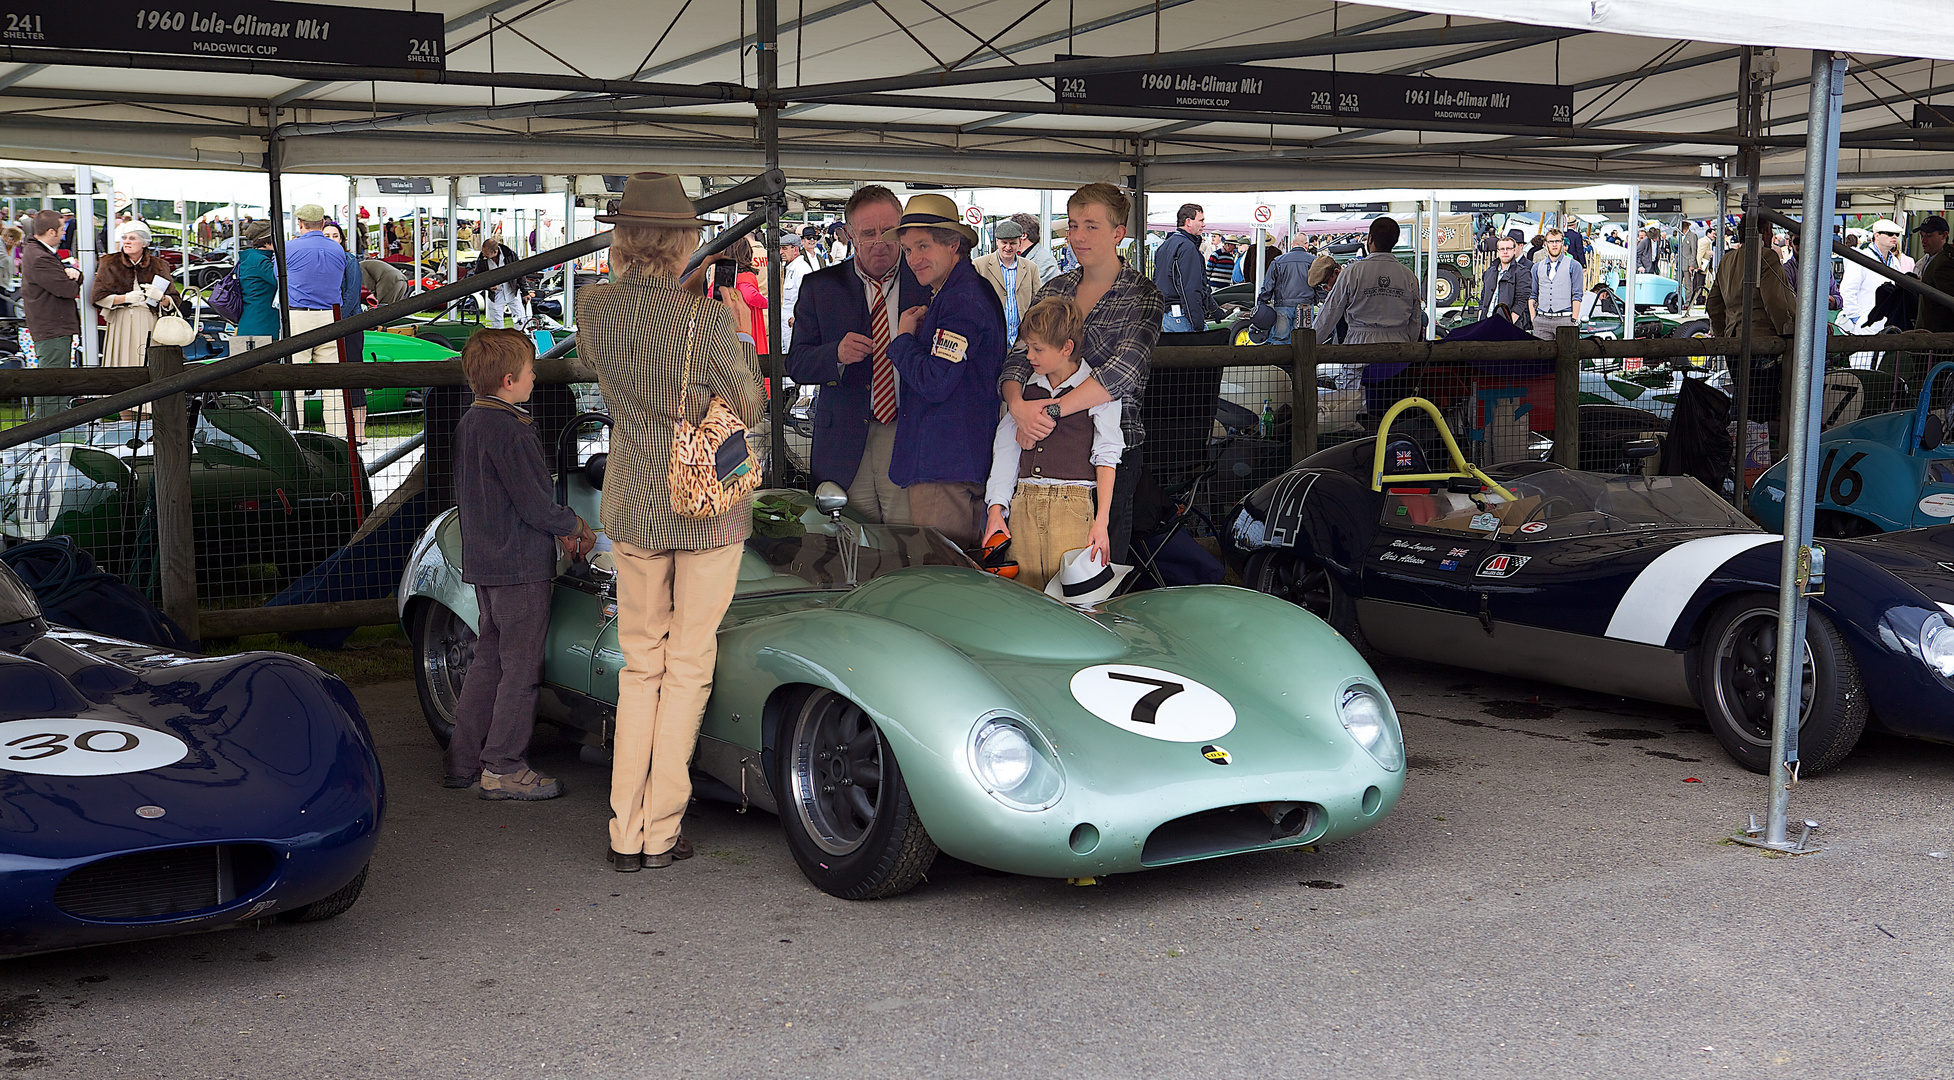 Fastest car im MADGWICK CUP Goodwood Revival 2010